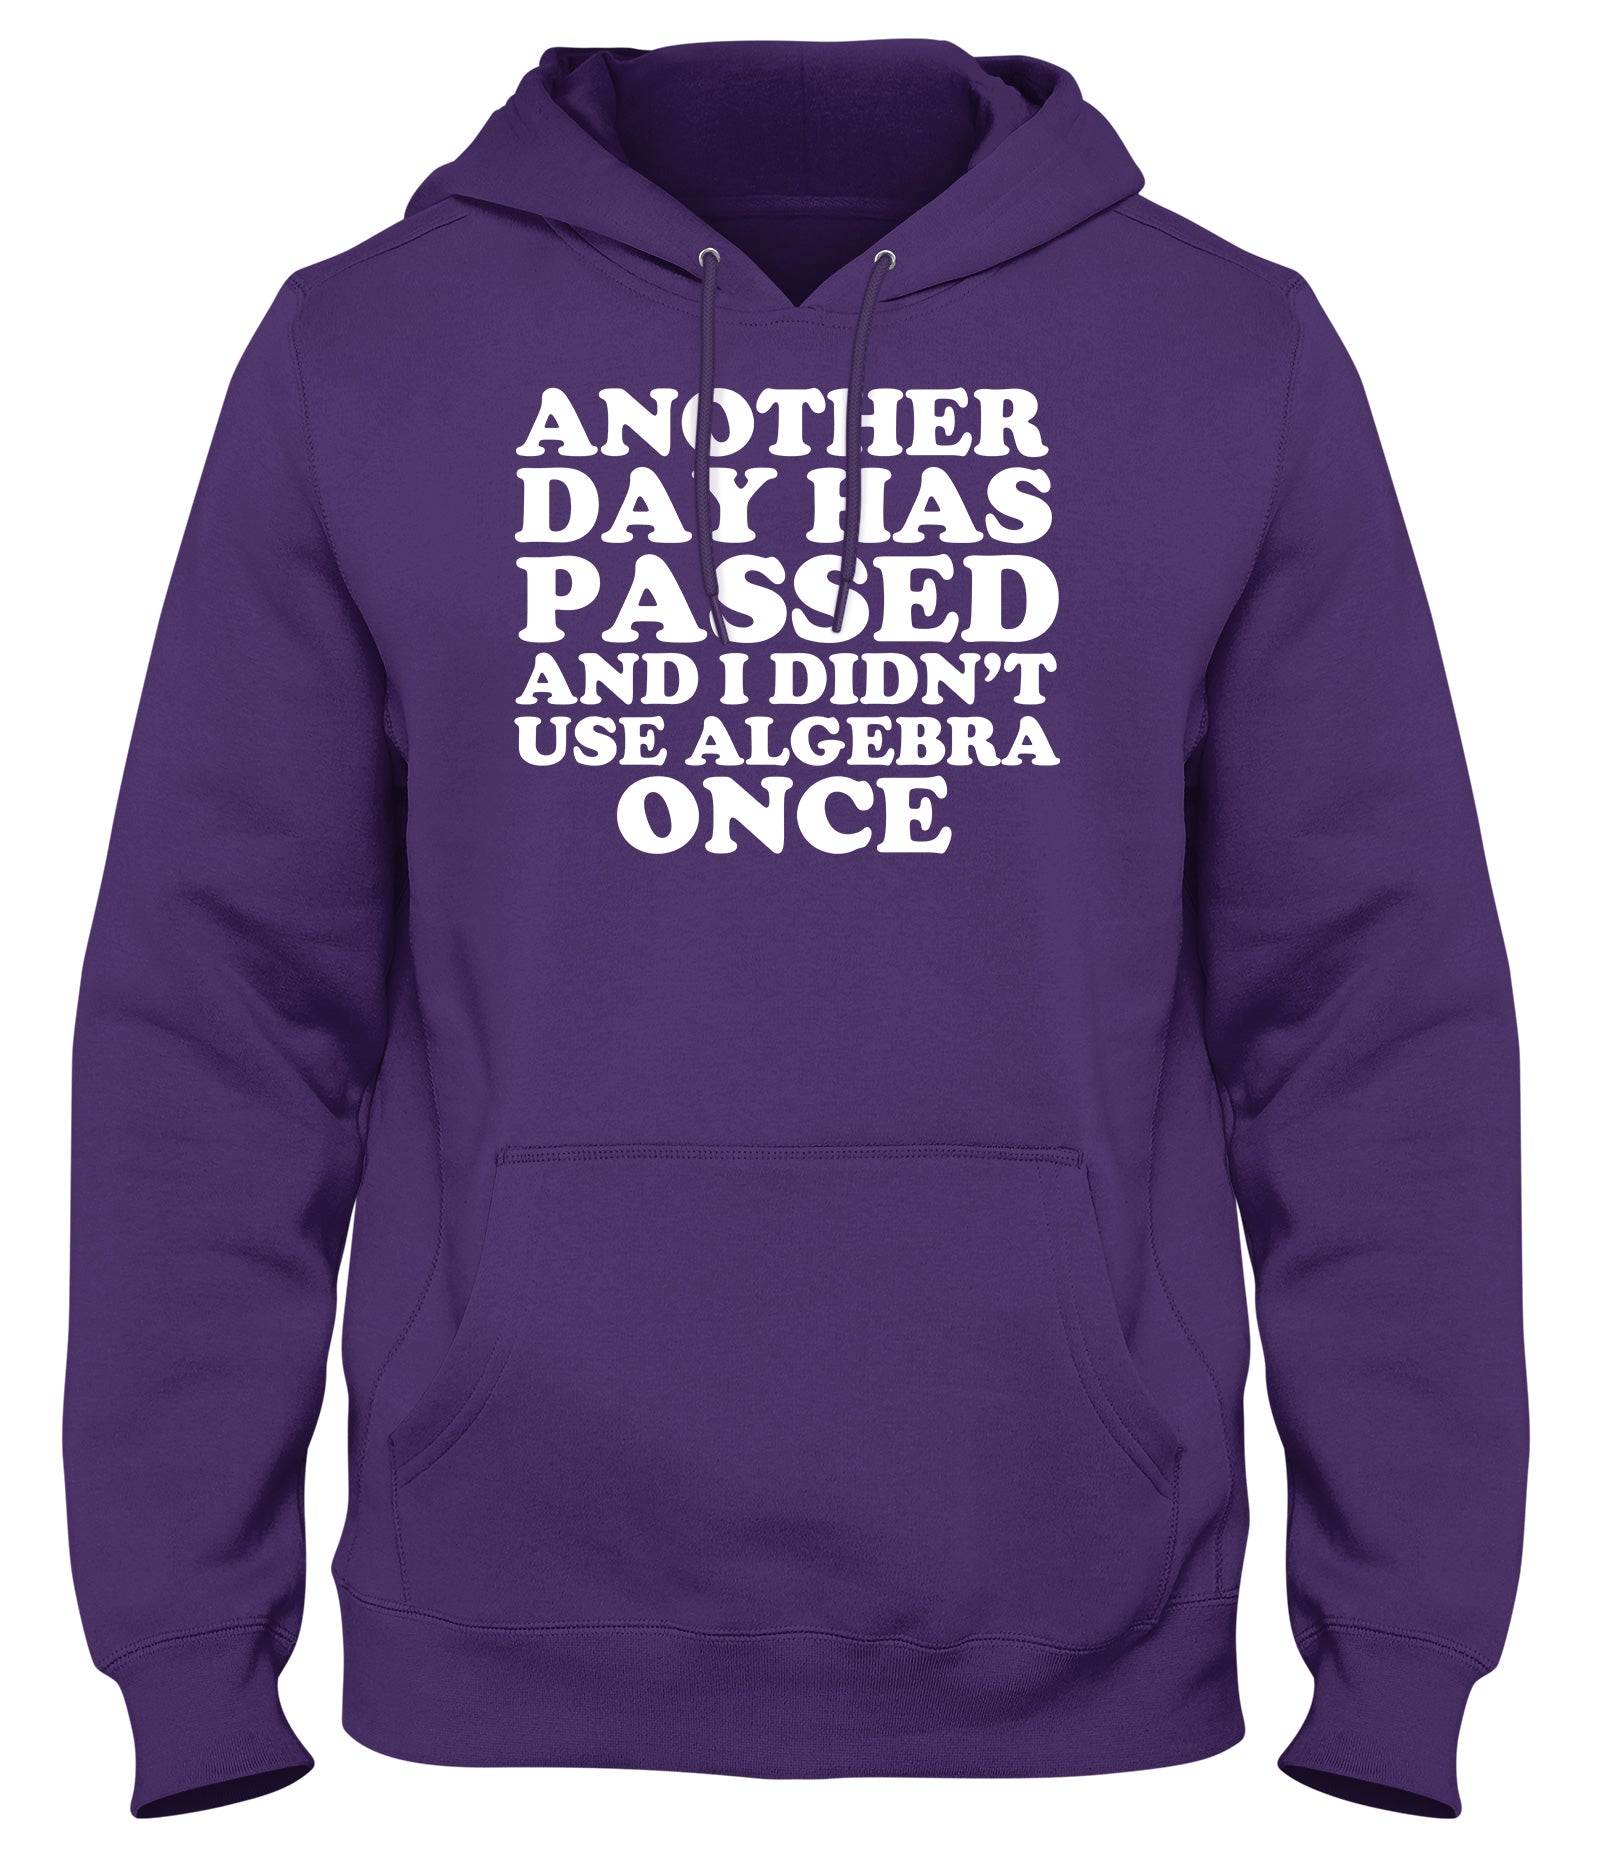 ANOTHER DAY HAS PASSED AND I DIDN'T USE ALGEBRA ONCE WOMENS LADIES MENS UNISEX HOODIE